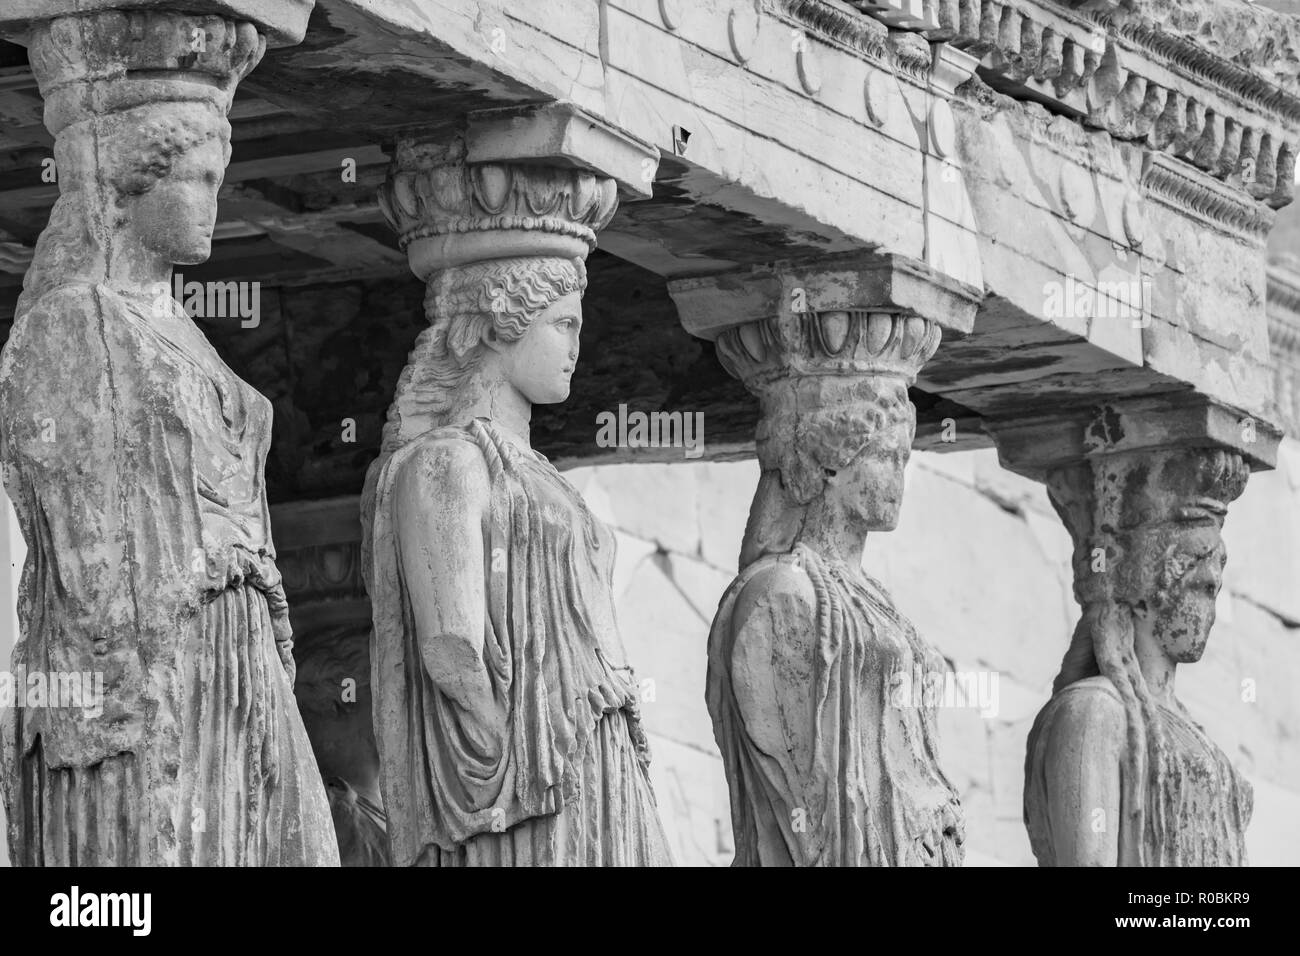 Athens, Greece - October 28 2018: Caryatid statues in Erechtheion, Parthenon temple, Acropolis hill - black and white Stock Photo